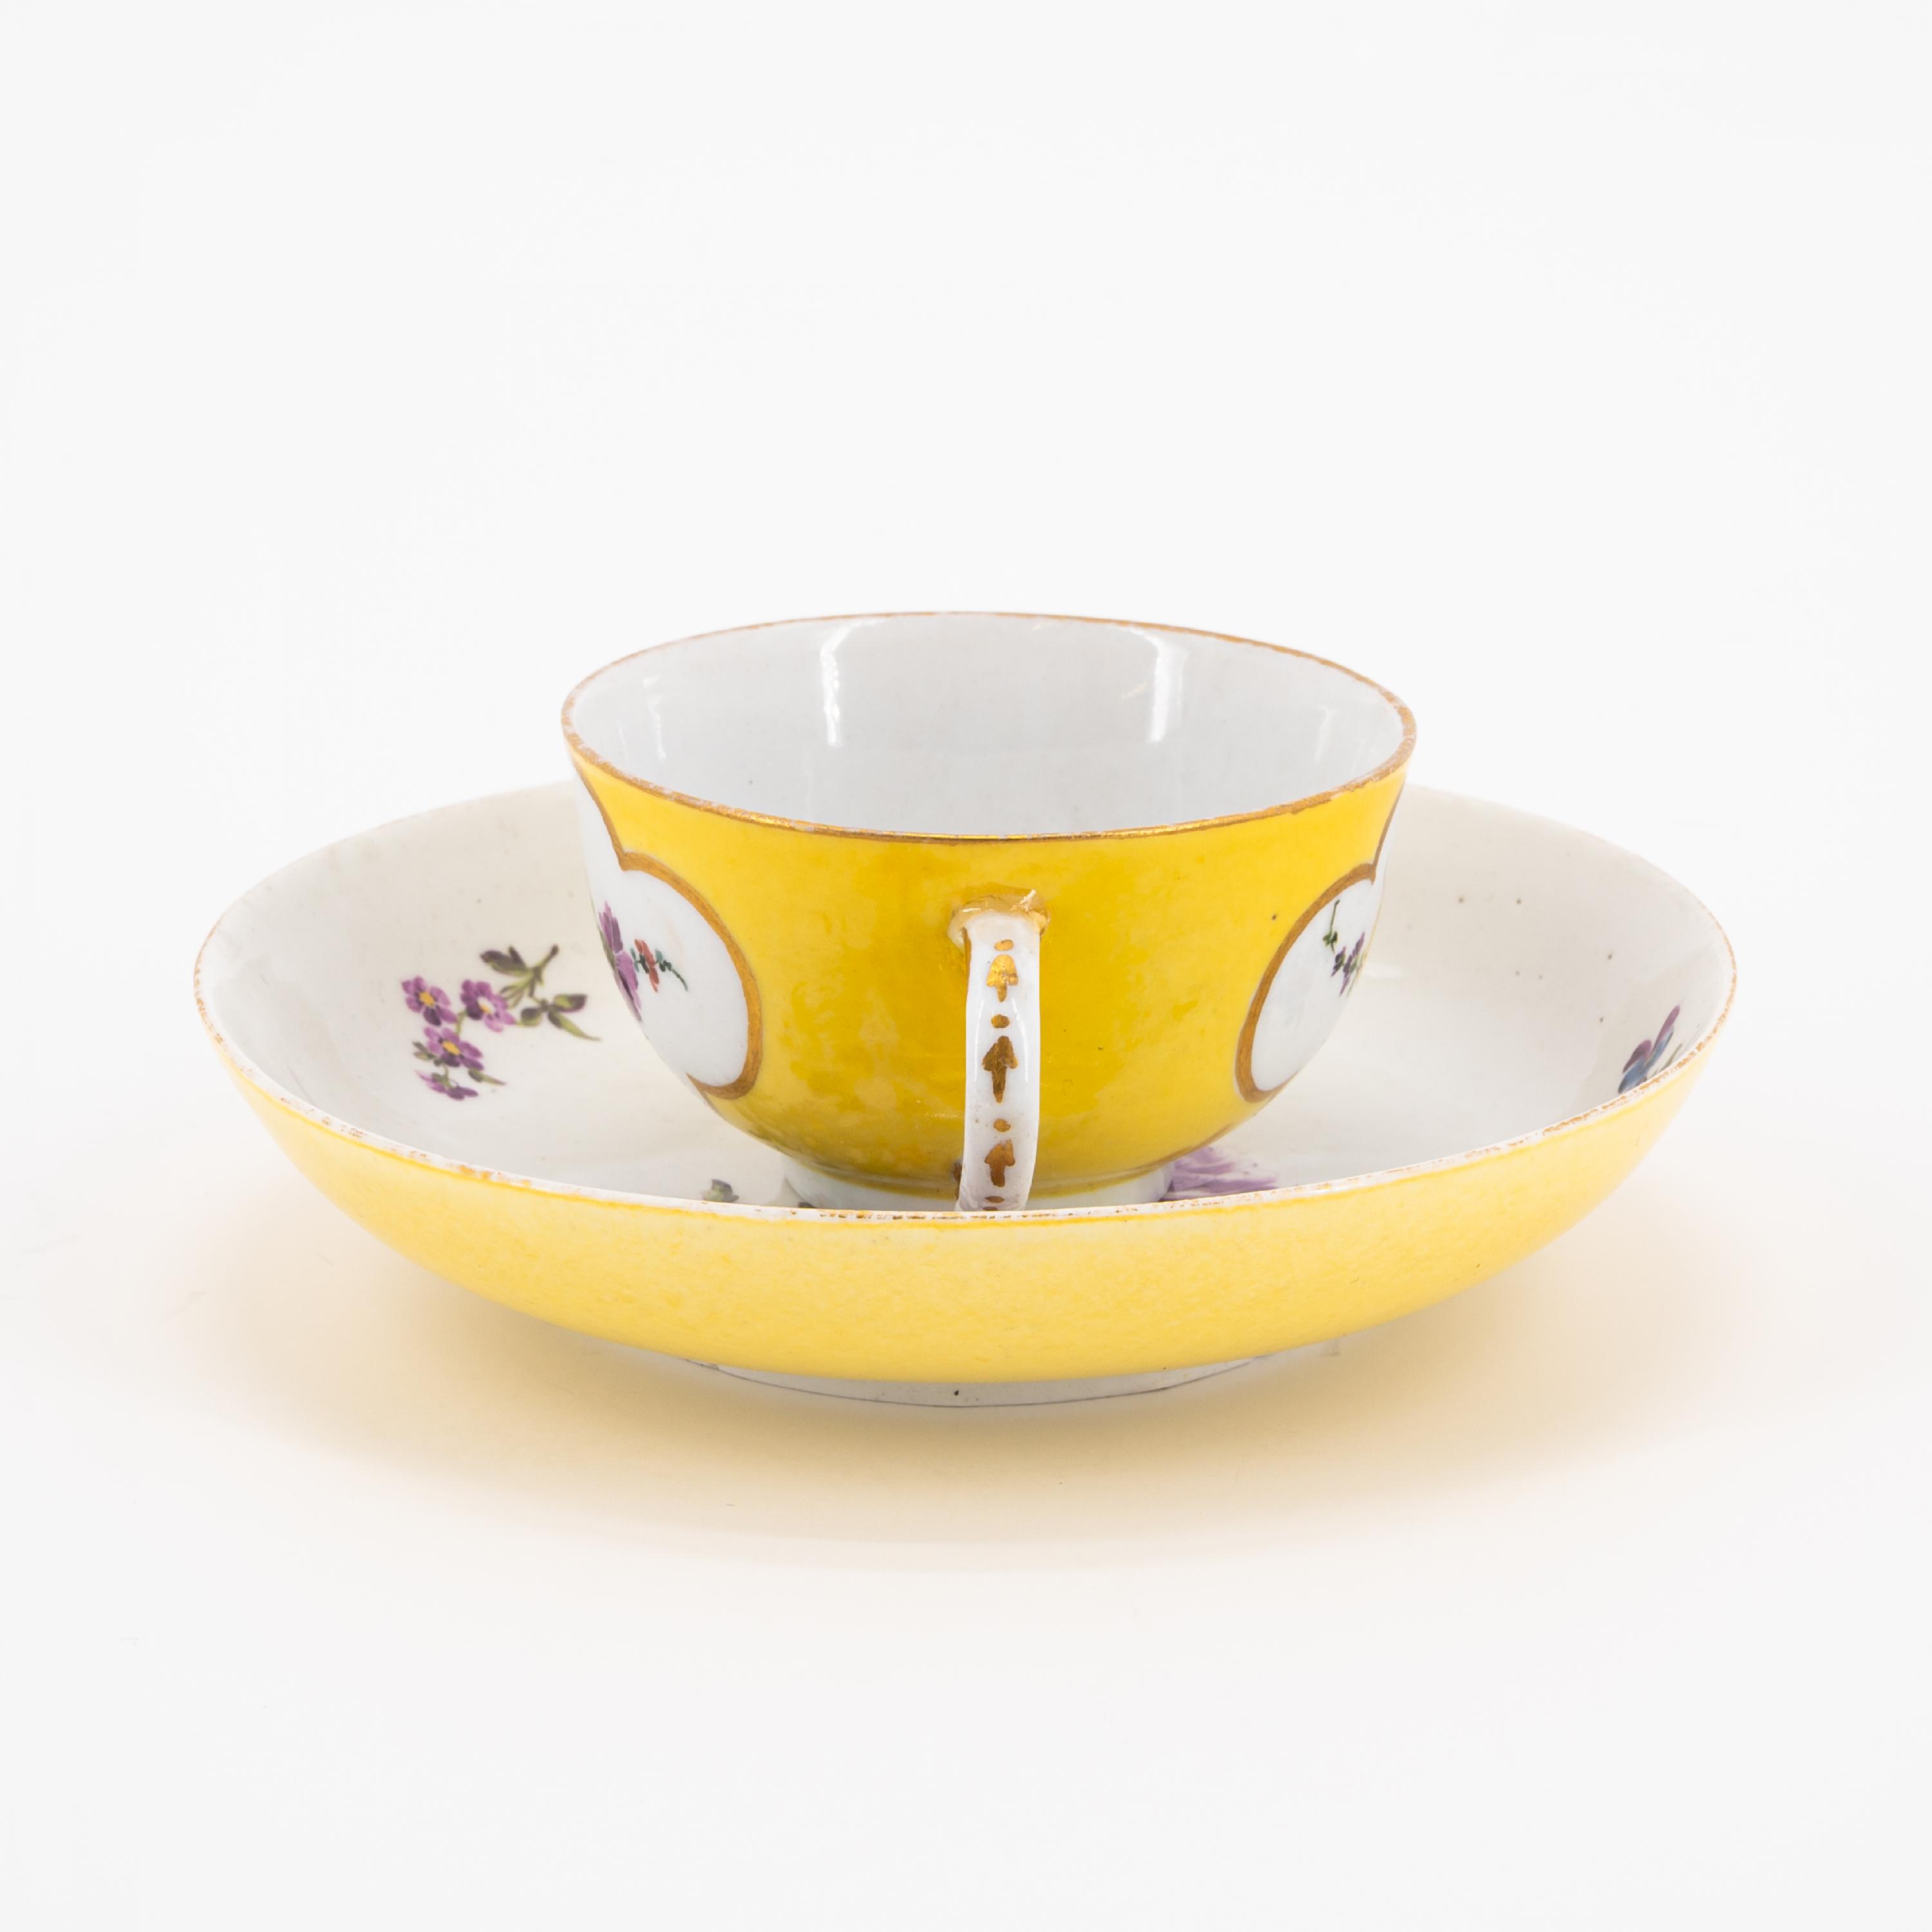 TWO PORCELAIN CUPS AND SAUCERS WITH YELLOW AND ORANGE COLOURED GROUND AS WELL AS FLORAL DECOR - Image 2 of 11